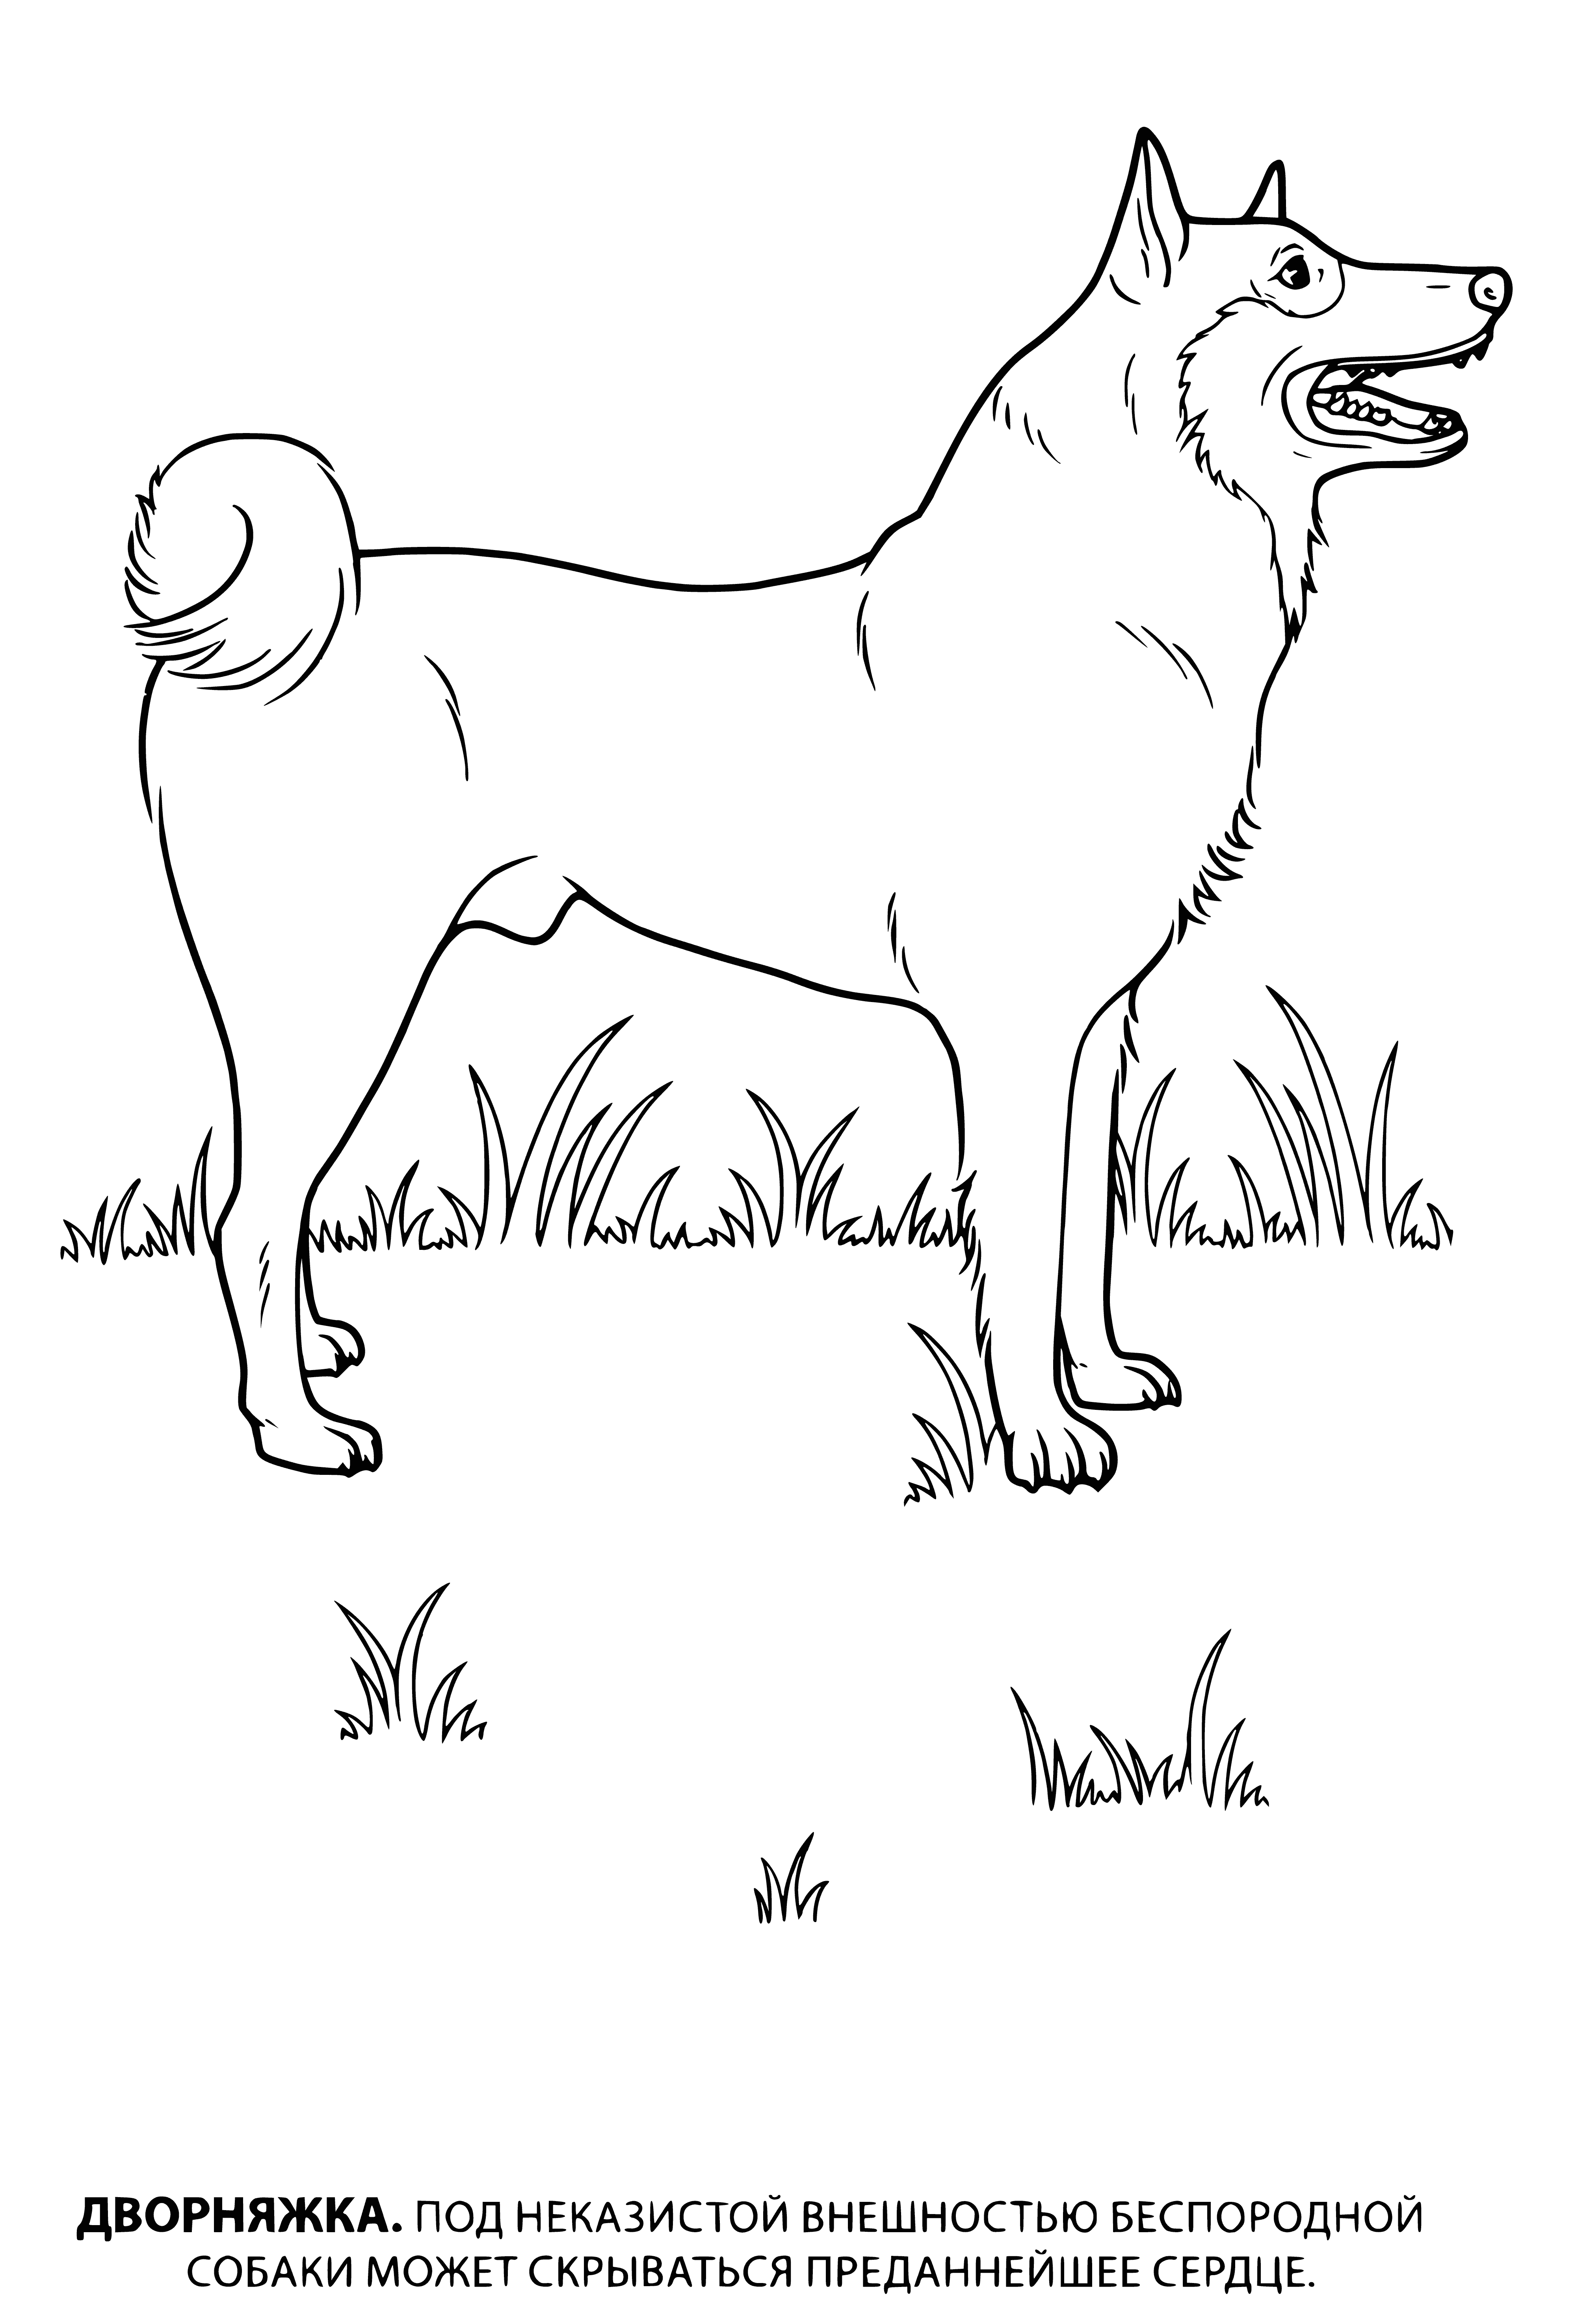 Mongrel coloring page